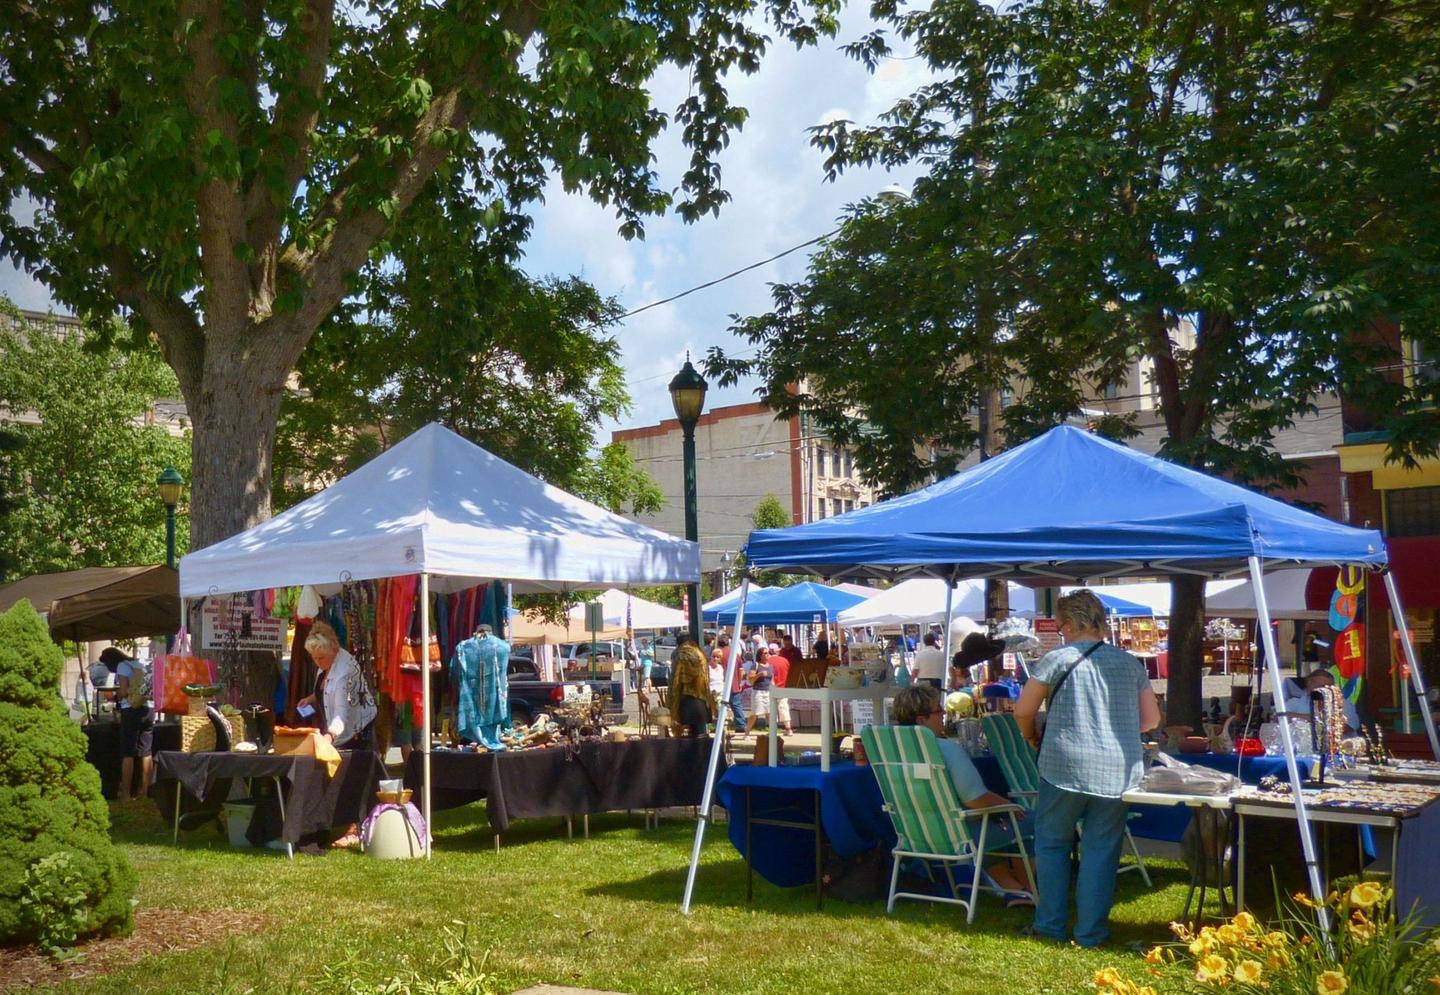 An outdoor space with a lawn and several pop up tents and street vendorsVendors will available throughout the Carbondale Pioneer Nights event selling food, refreshments, and more!